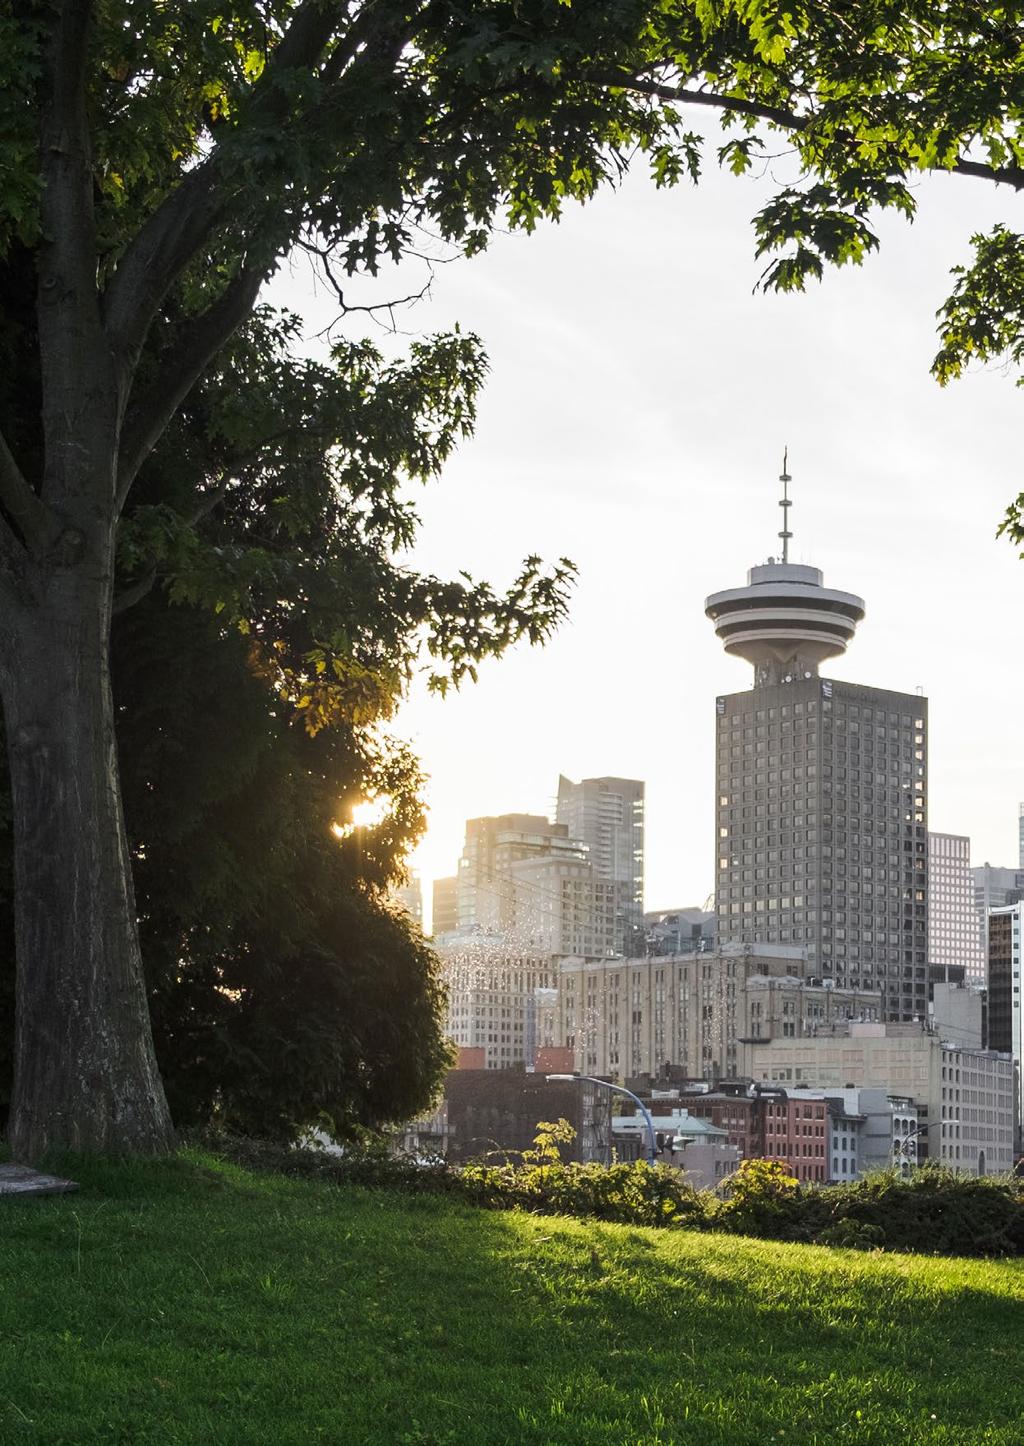 KEY FINDINGS We consulted 120 local stakeholders through in-person interviews and roundtables from key areas in Vancouver s music sector, including education, music technology, artists and